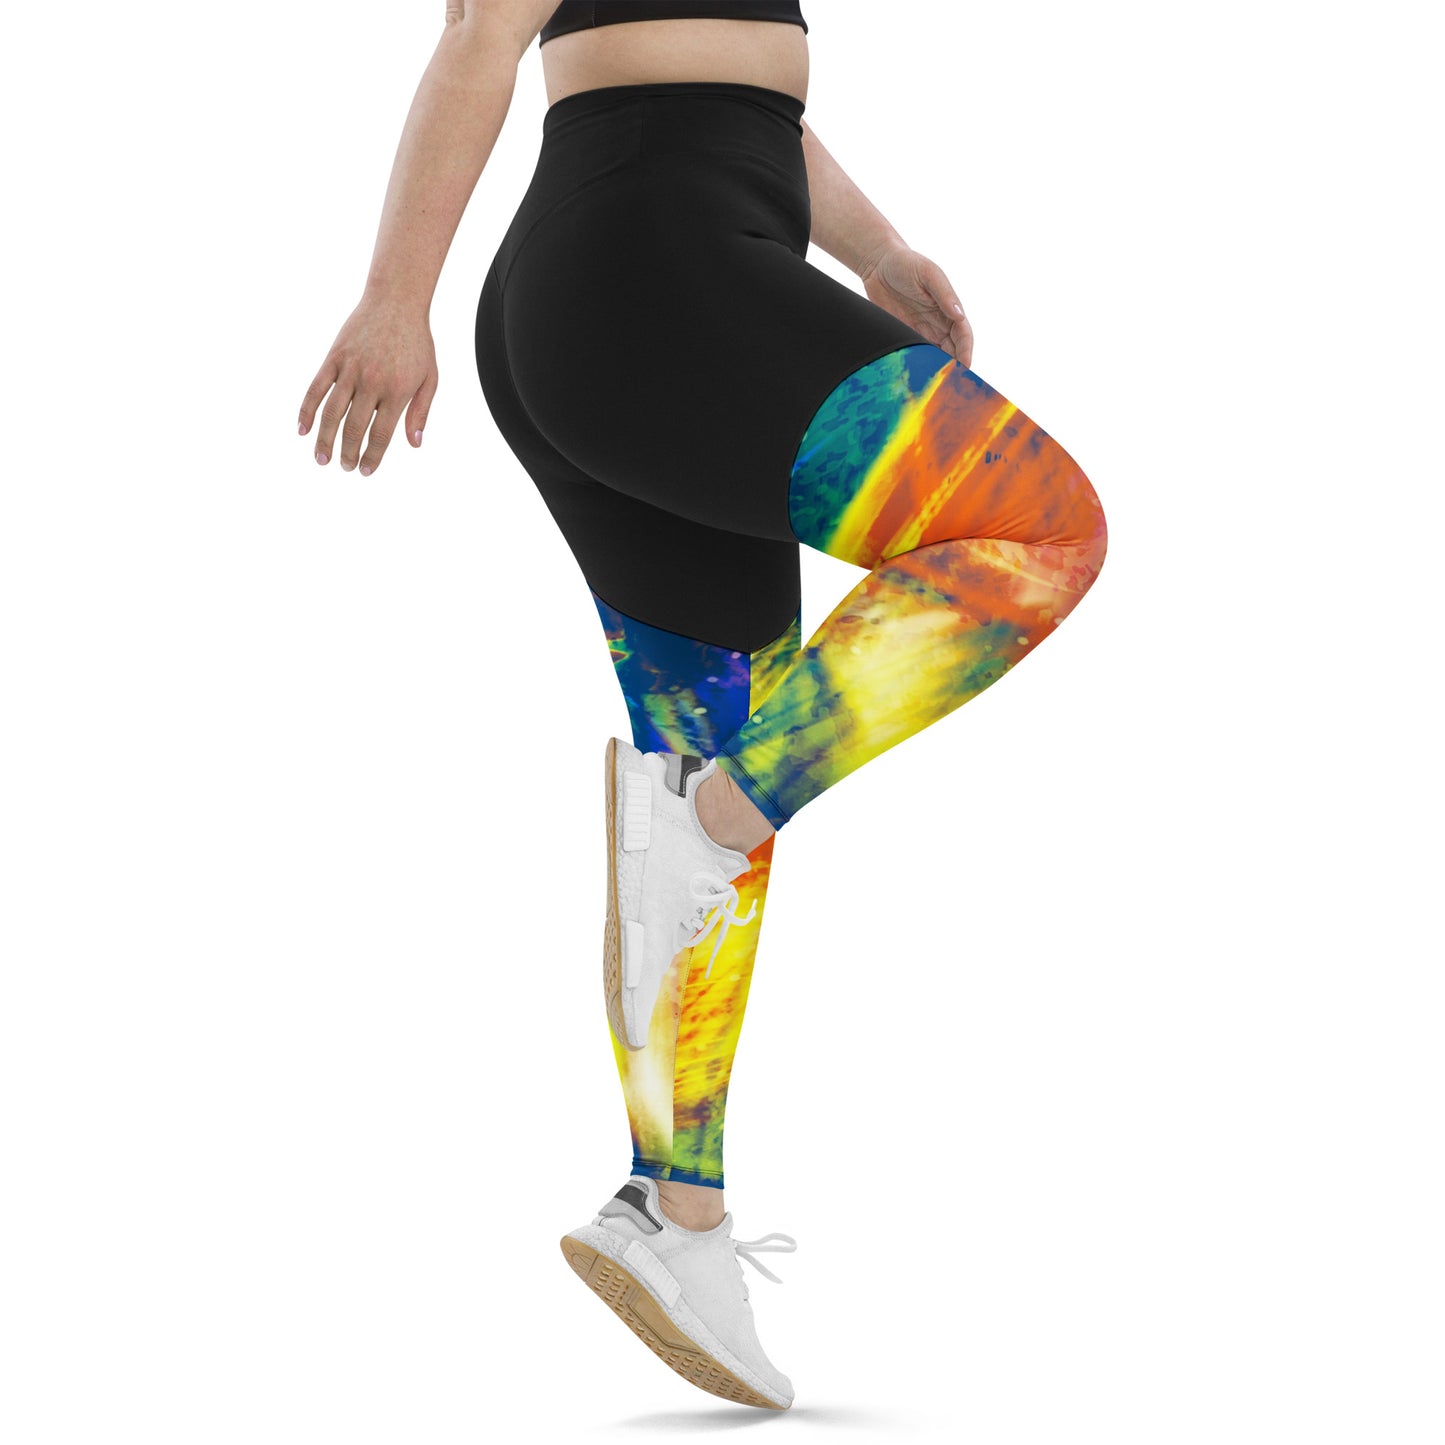 America’s Swag 312 Abstract Sports Leggings